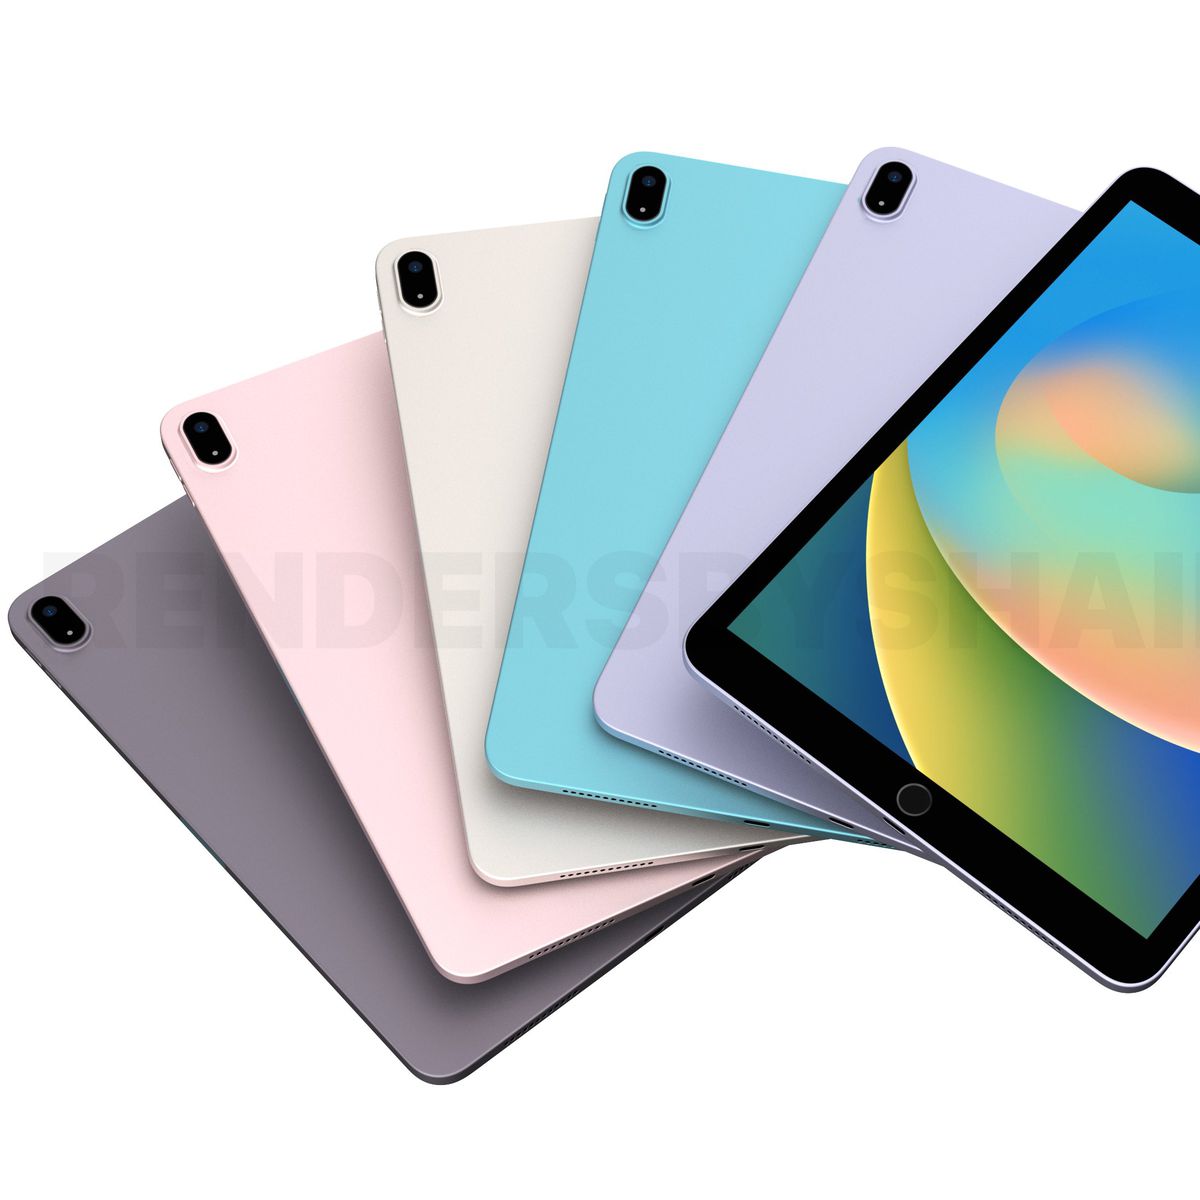 2022 iPad 10th Generation: Here's everything you need to know